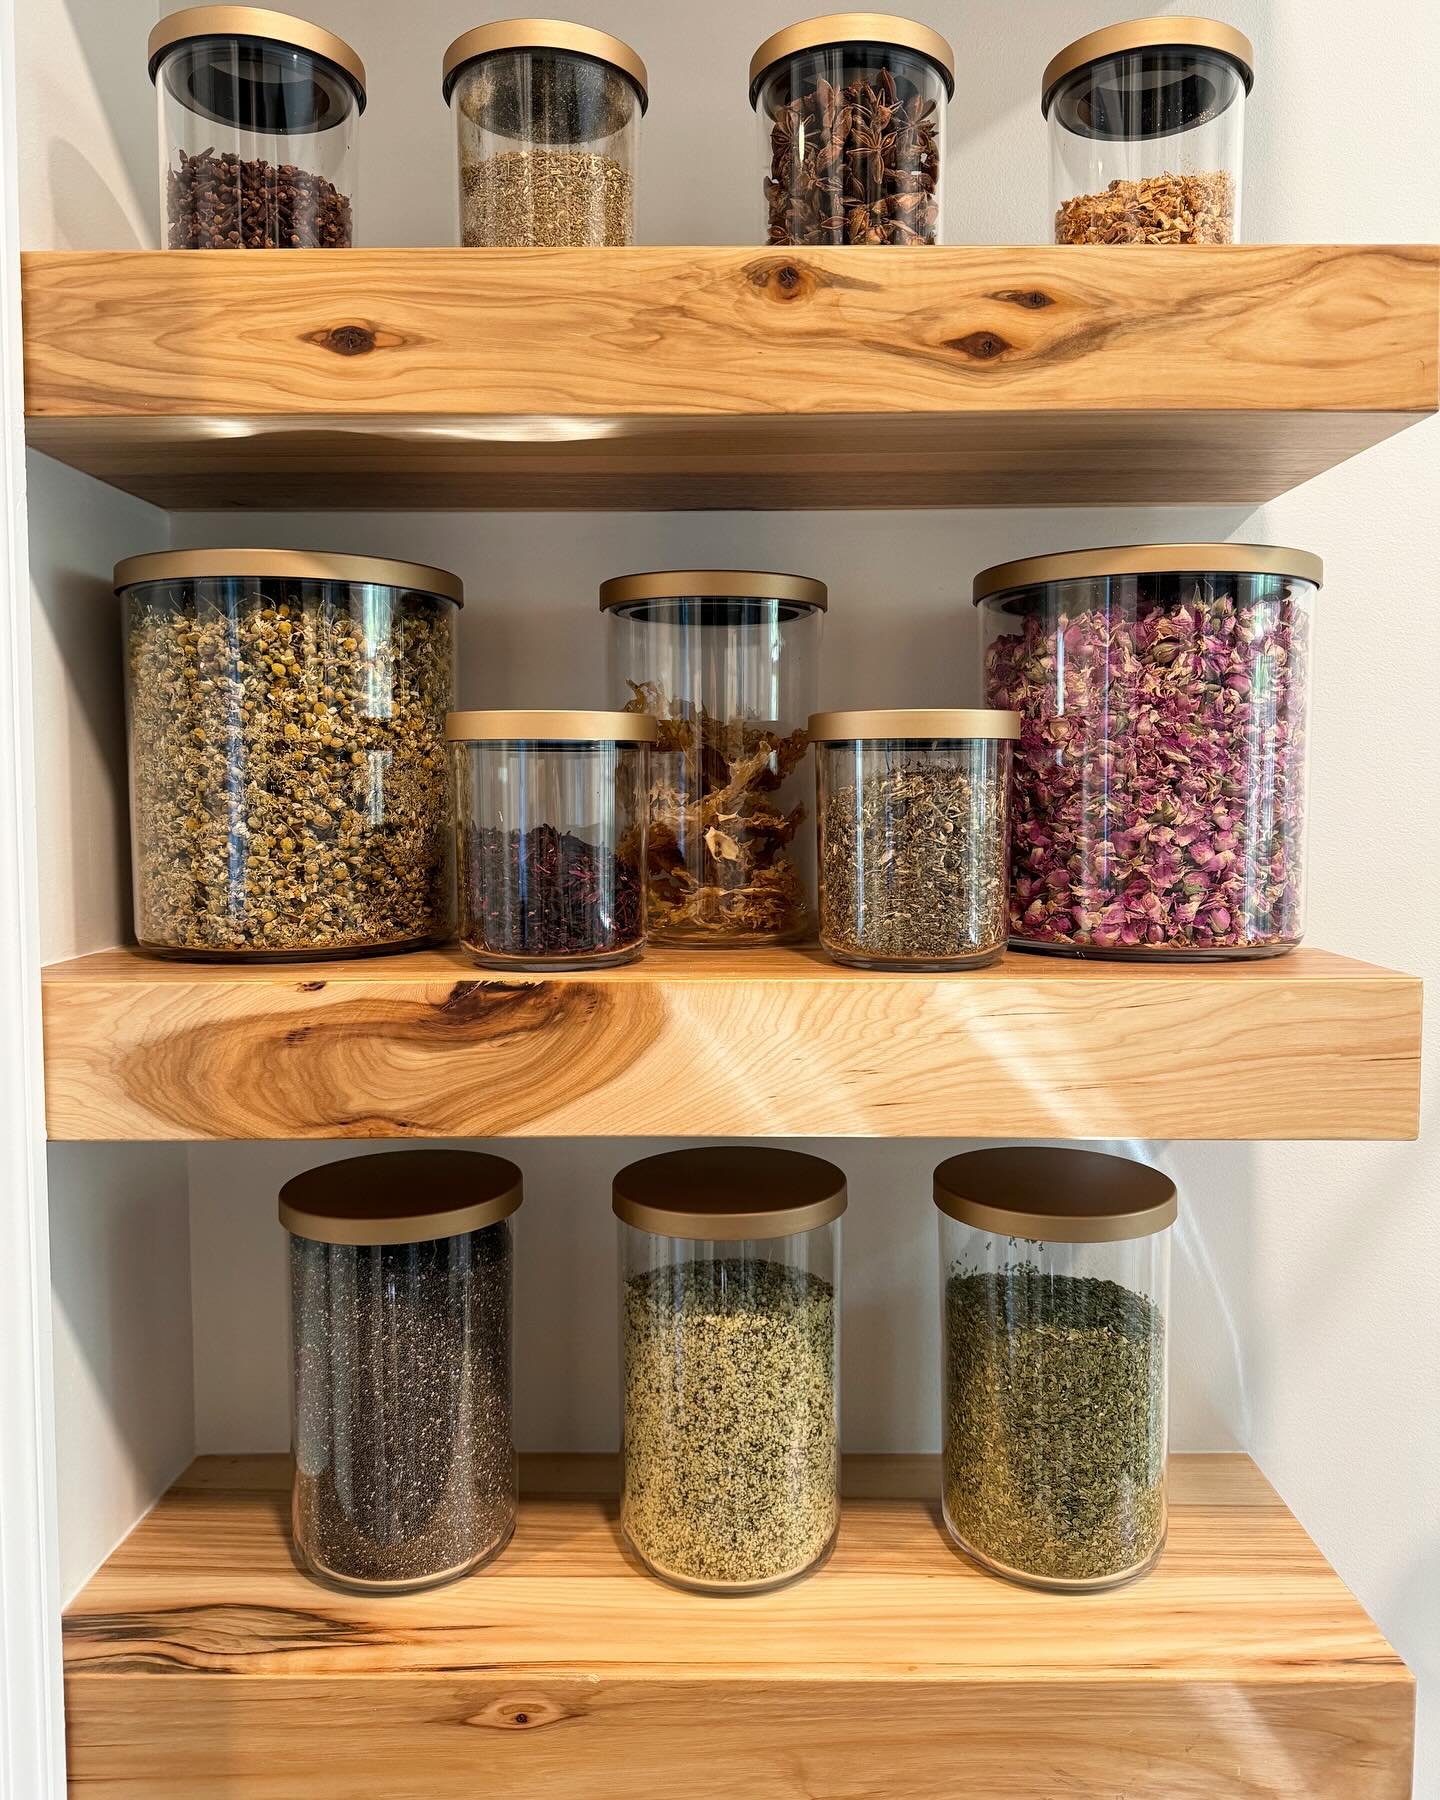 Monday moment of zen and reminder that you can handle whatever this week (or May Madness 🤪) throws your way with clarity, focus, and calm.

#pantryorganization #organizedpantry #pantrygoals #homeapothecary #professionalorganizer #614living #614moms 